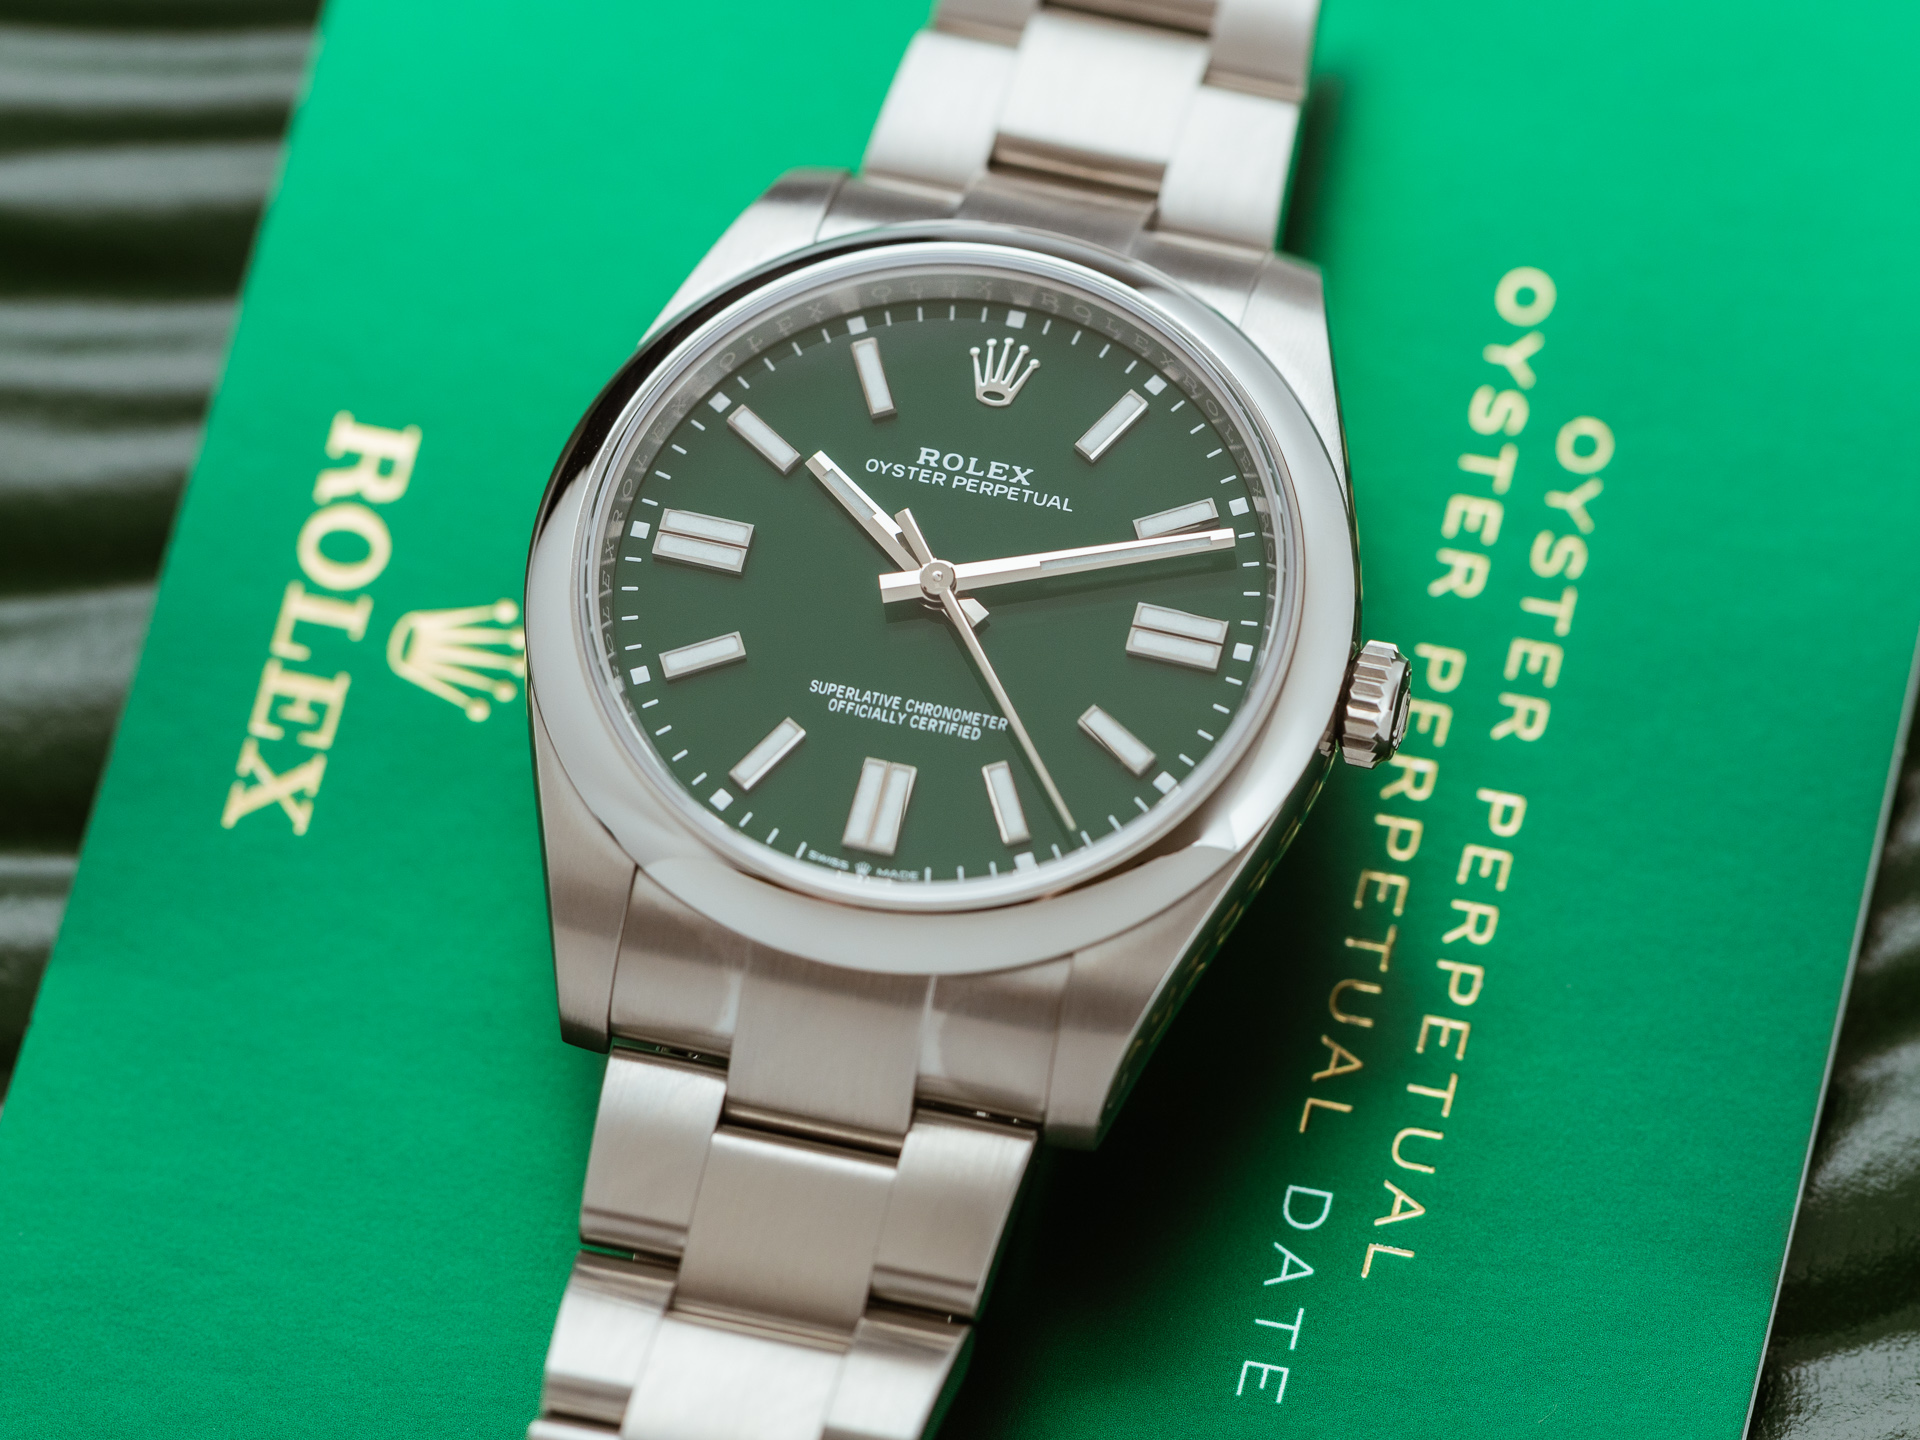 Rolex Oyster Perpetual 41 Stainless Steel - Green Index Dial - Oyster Bracelet (Ref#124300)